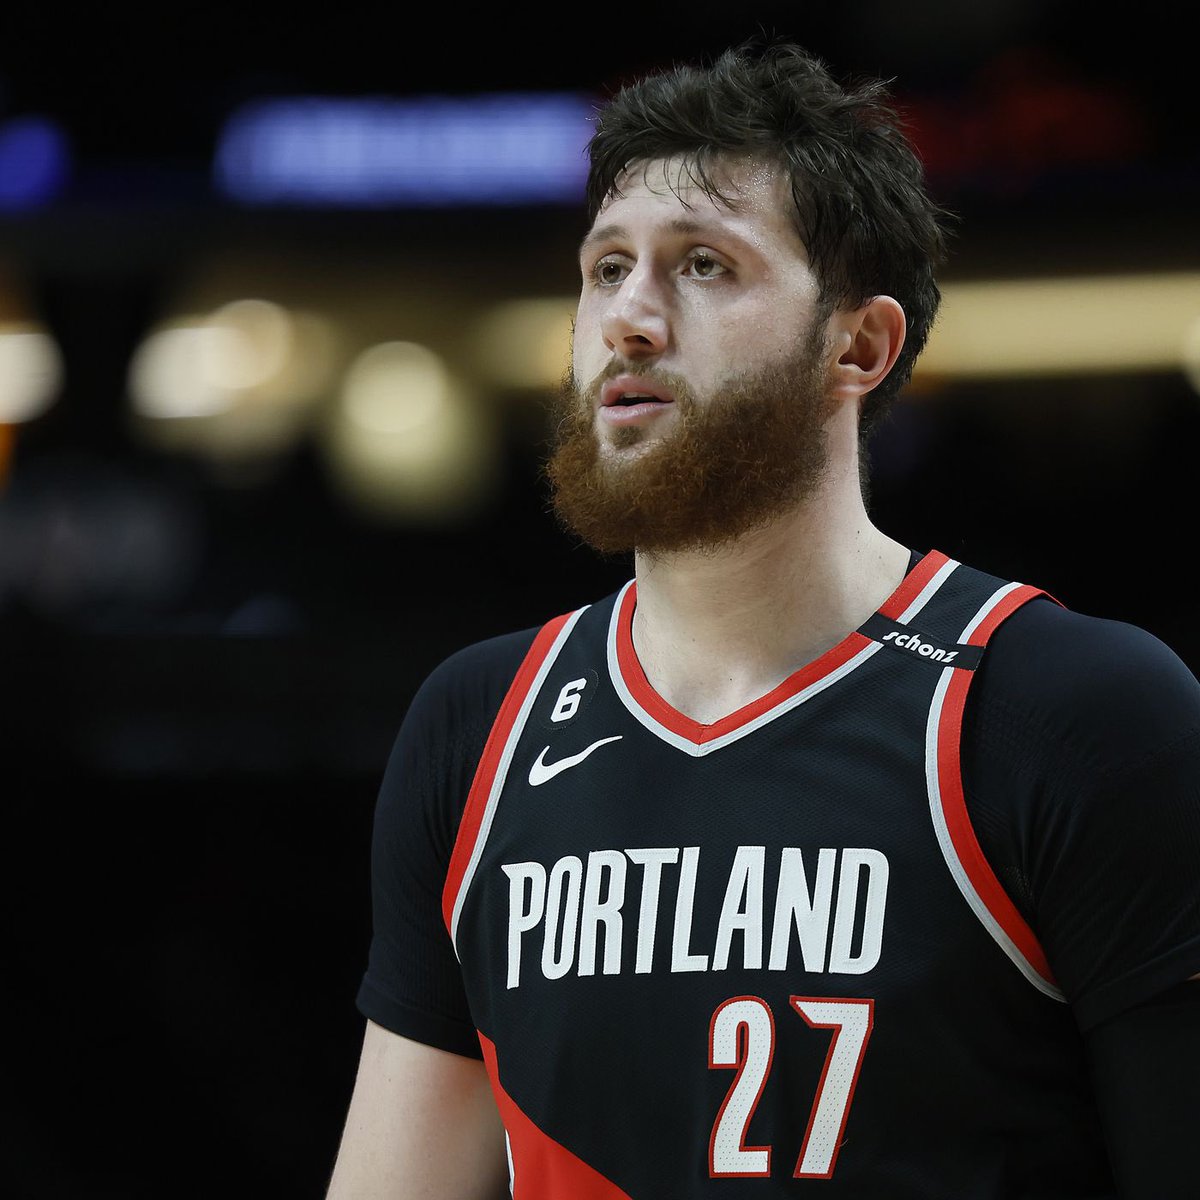 RT @LegionHoops: Jusuf Nurkic could be packaged with Damian Lillard in a trade package, per @ChrisBHaynes https://t.co/lePB0RxRPY